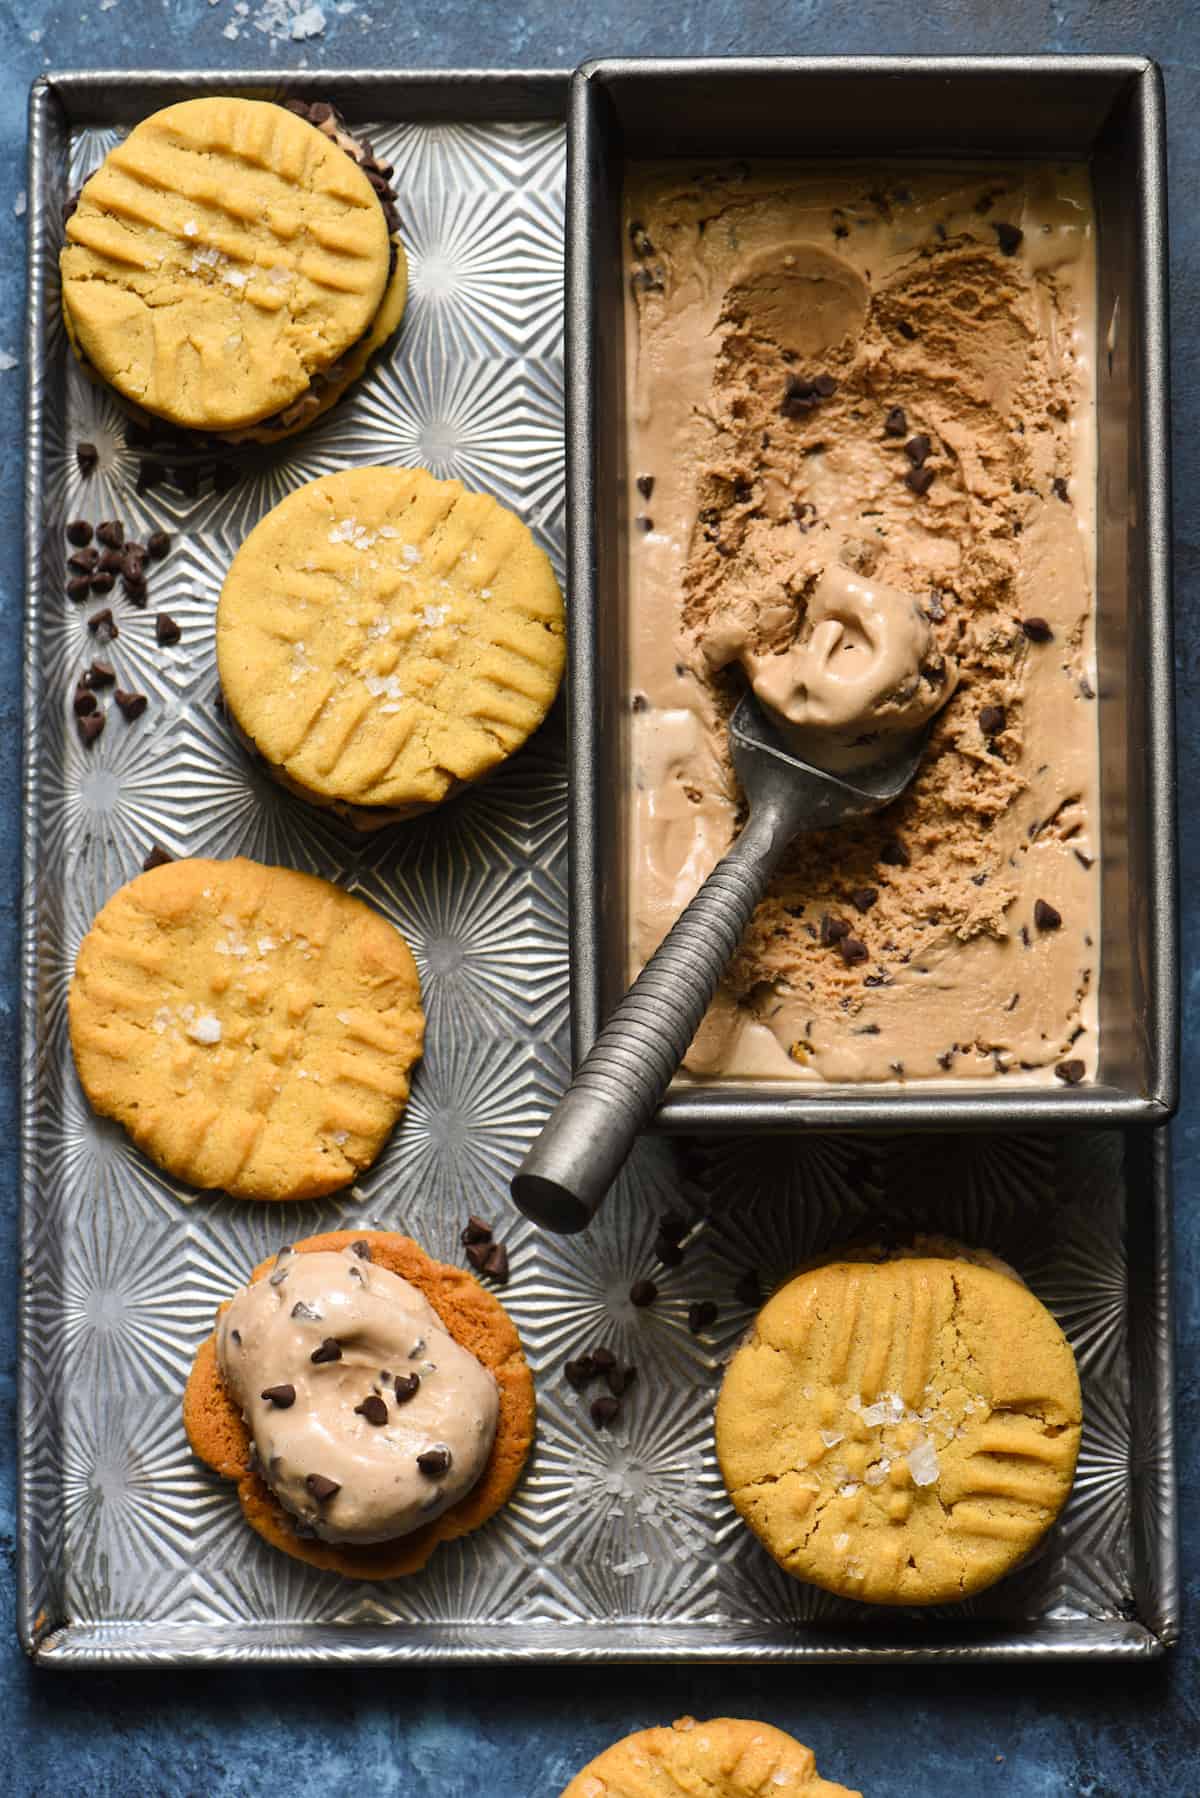 Salted Peanut Butter and Chocolate-Chocolate Chip Ice Cream Sandwiches - Make these for the chocolate and peanut butter lover in your life! Peanut butter cookies are finished with flaky sea salt and then sandwiched with triple-chocolate ice cream. | foxeslovelemons.com